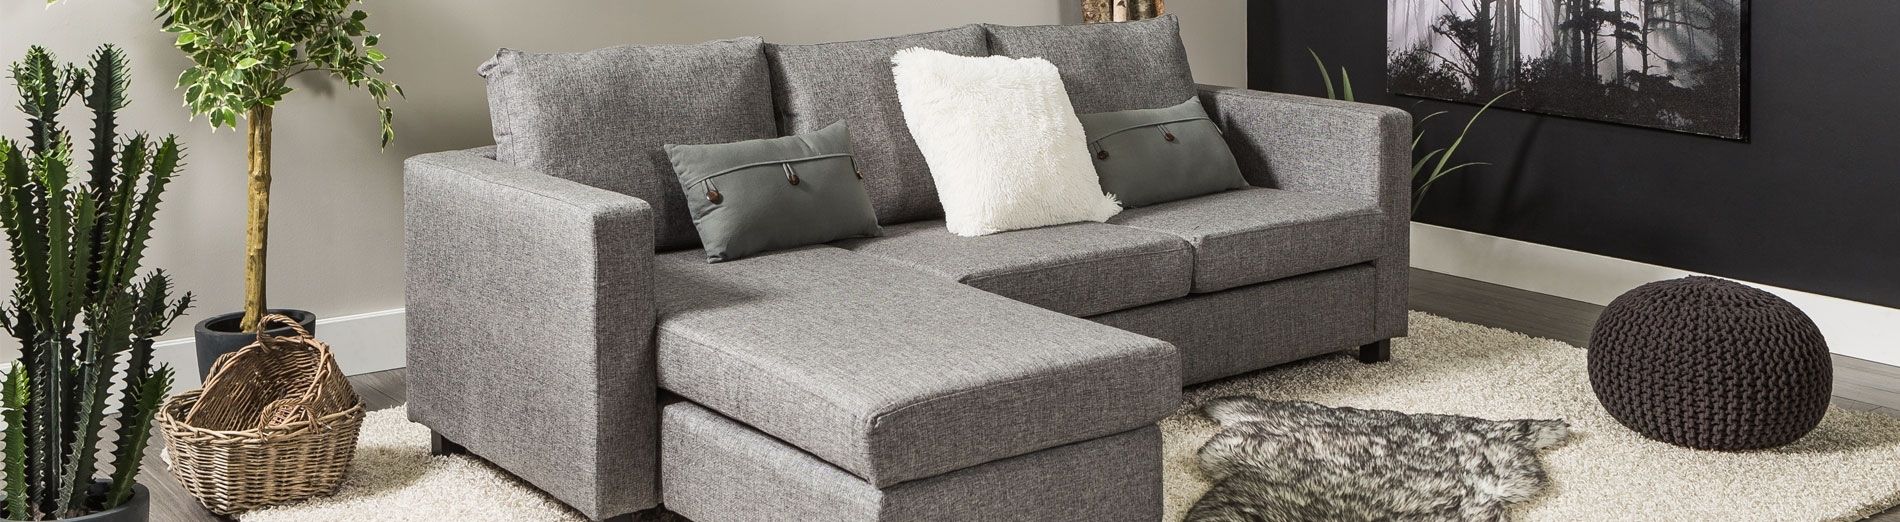 Sofas & Sofabeds & Futons | Living Room Furniture | Furniture | Jysk Pertaining To Jysk Sectional Sofas (View 5 of 10)